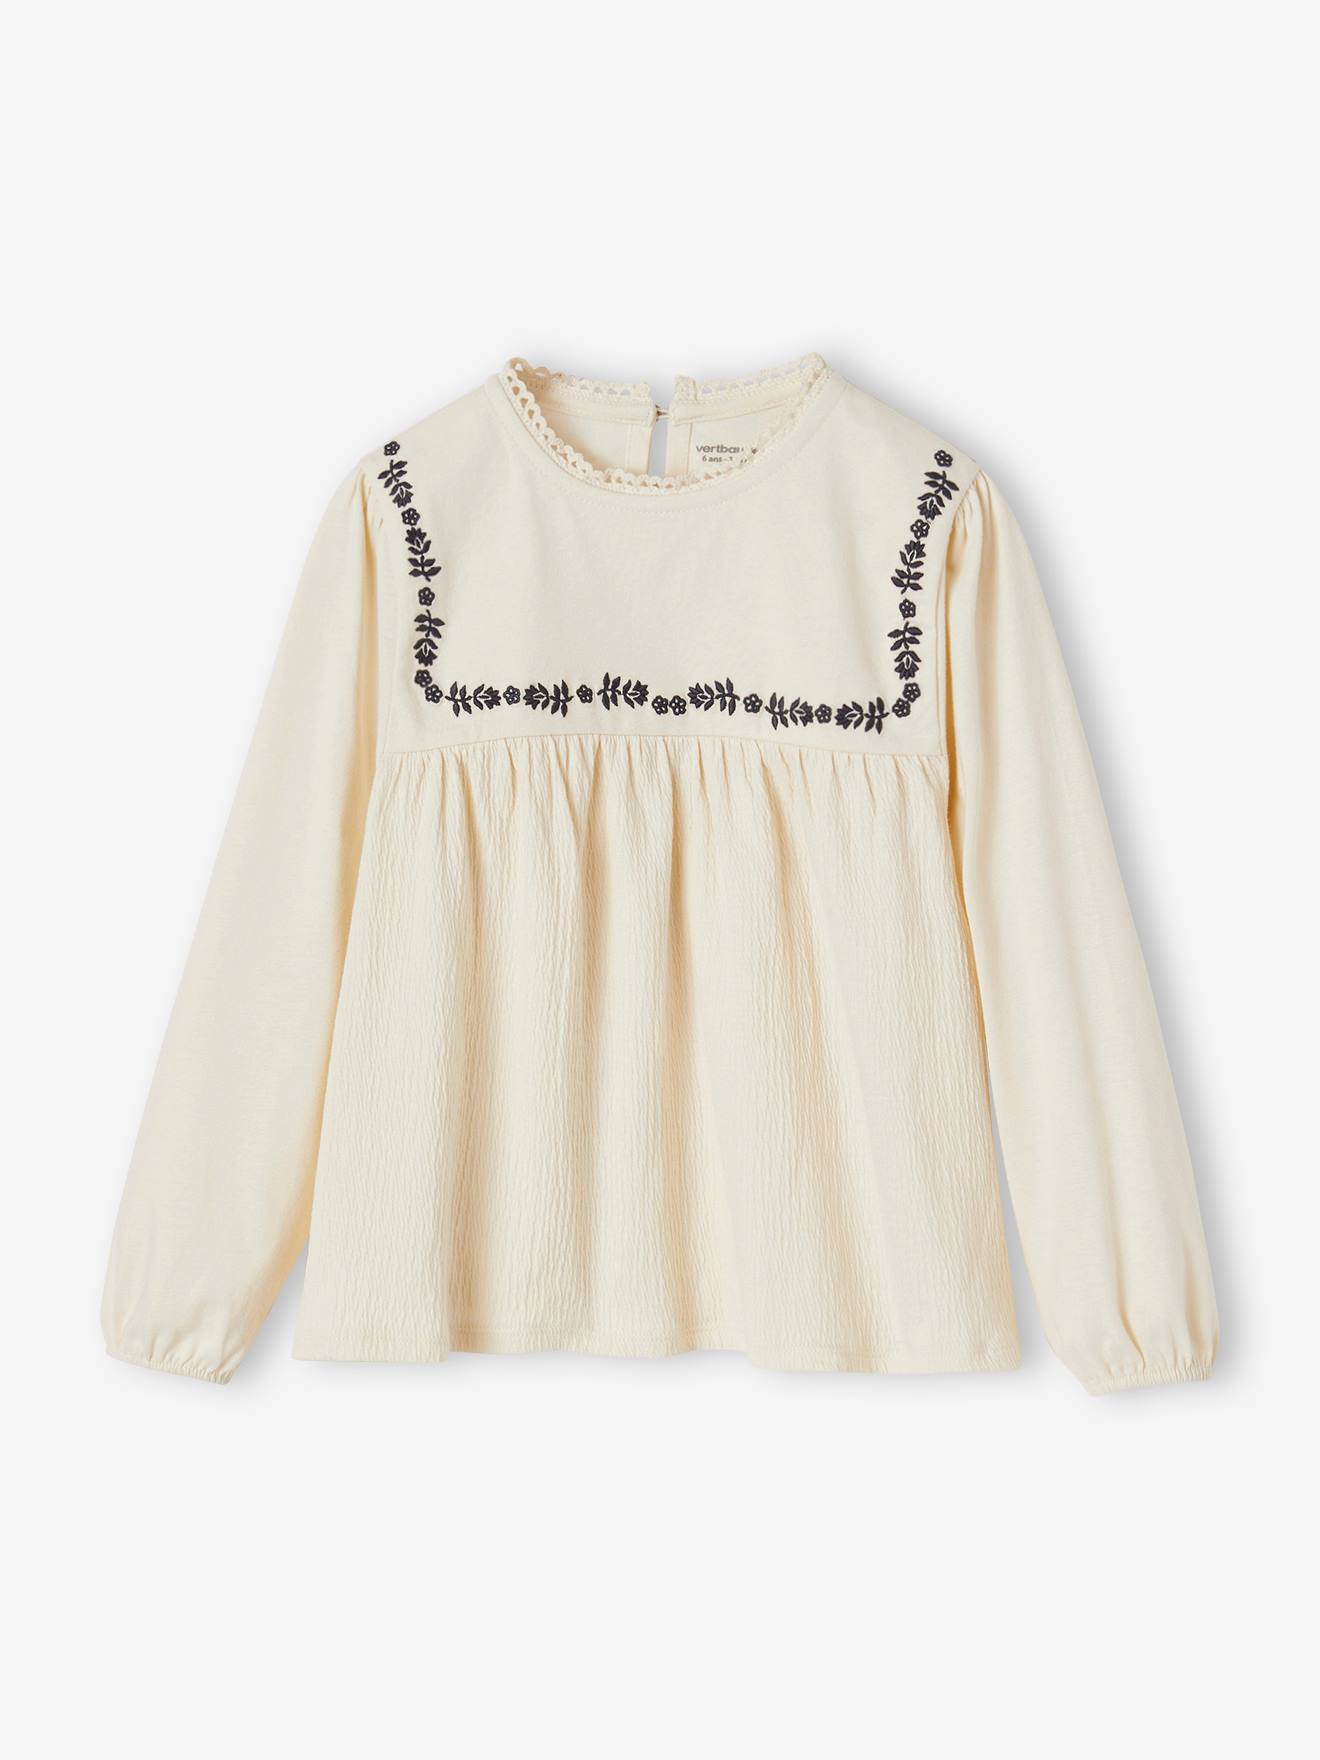 Blouse-Like Top with Embroidered Flowers, for Girls vanilla